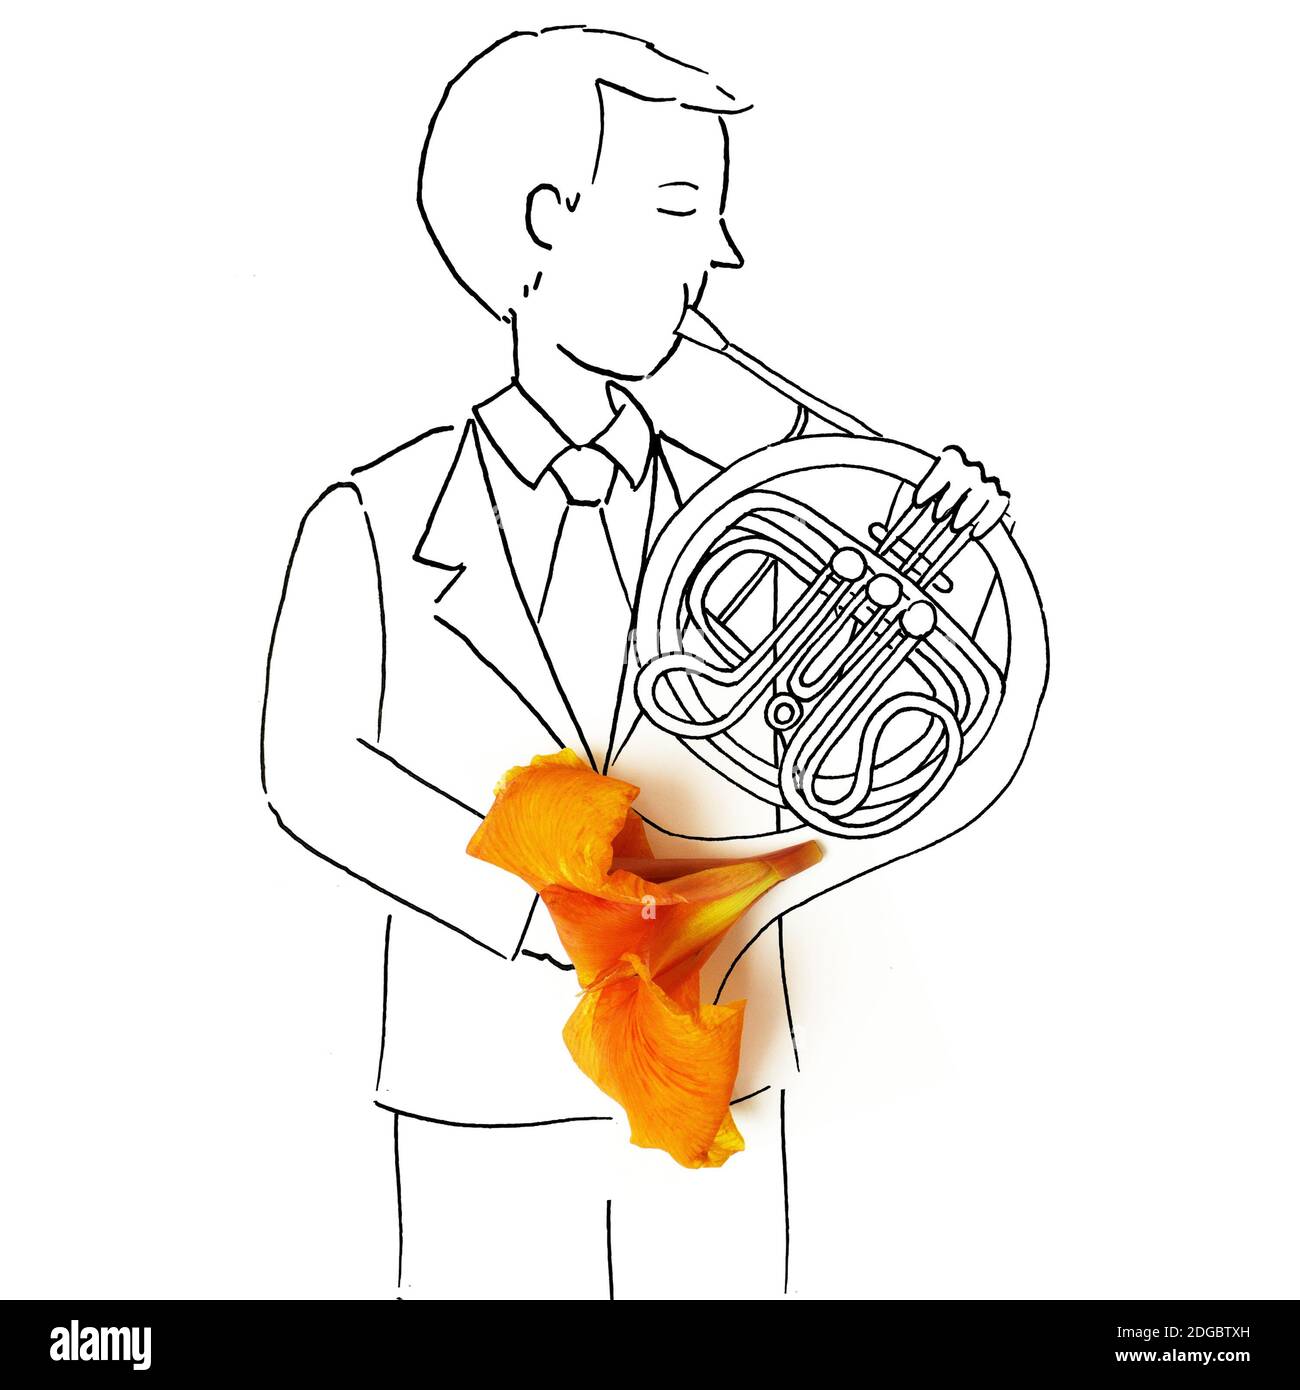 Conceptual man playing the French horn Stock Photo